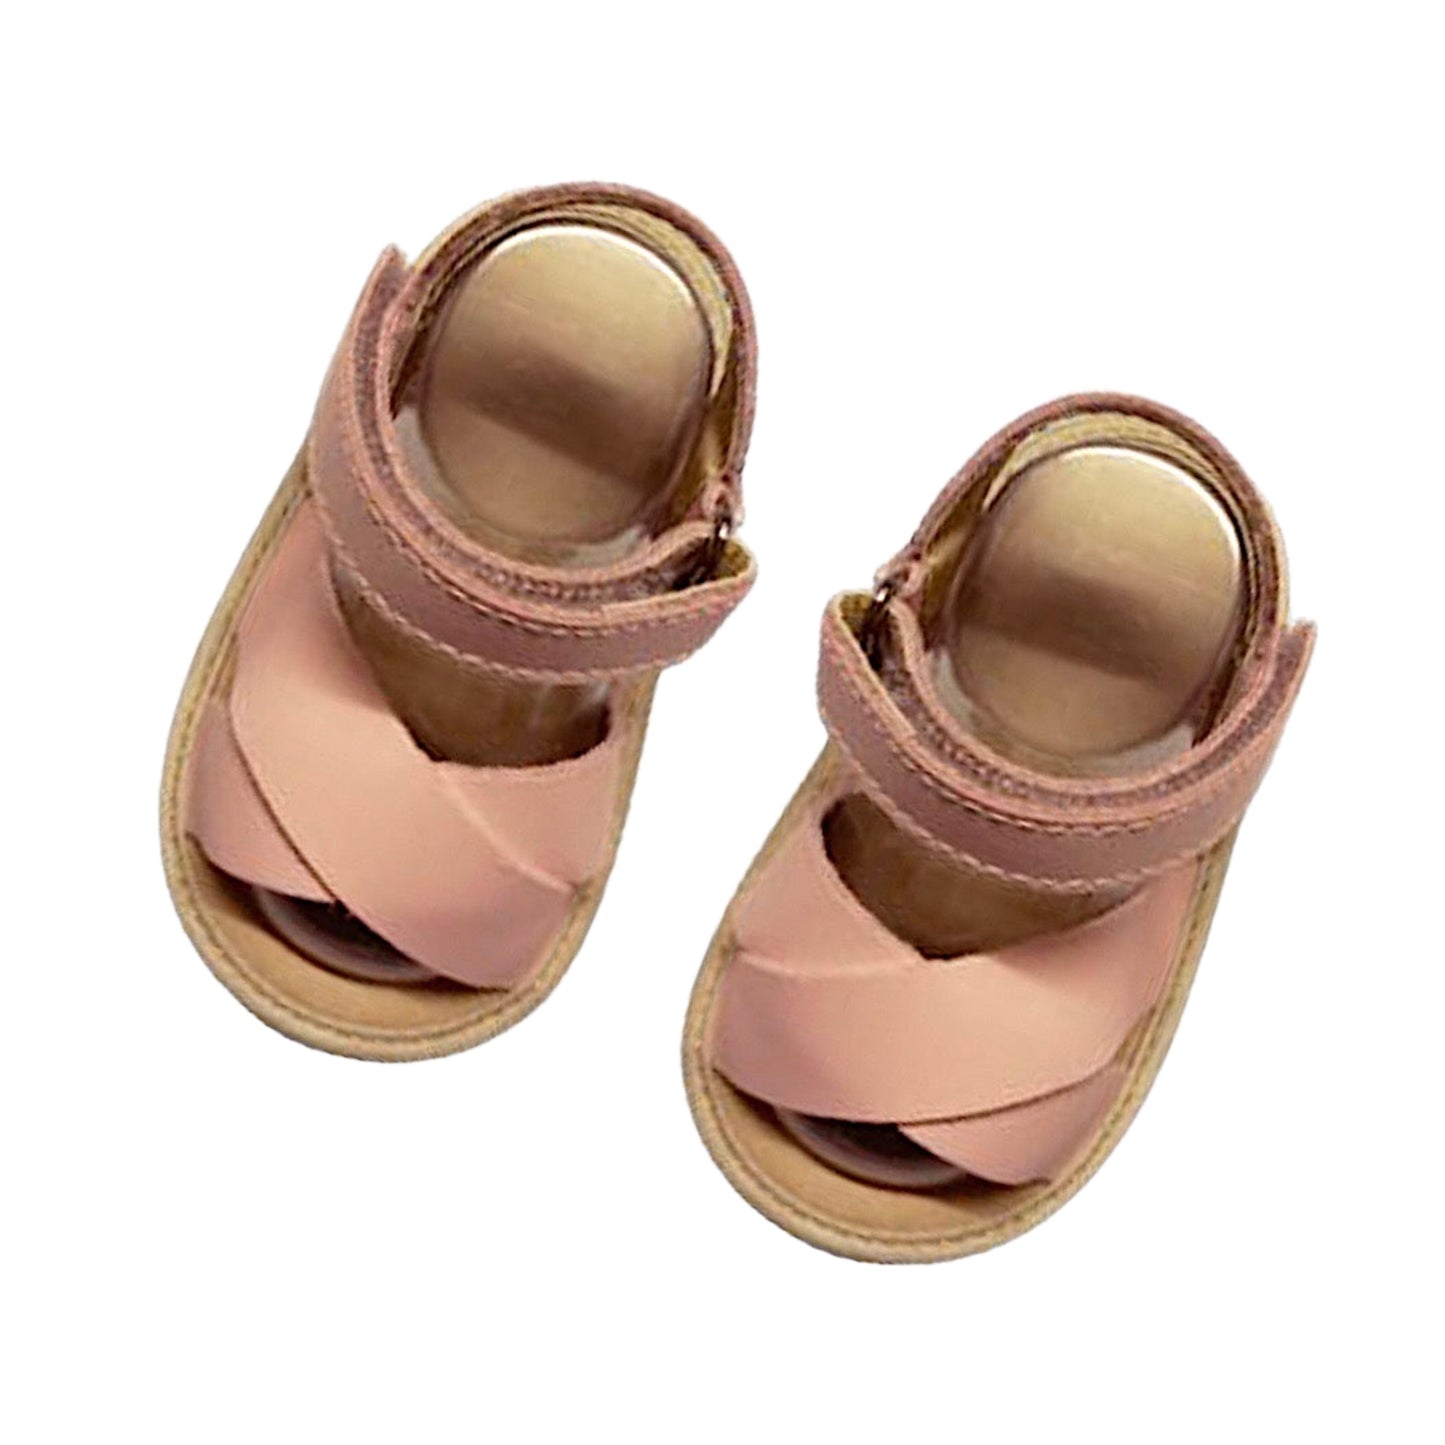 Summer Fun Leather Baby Sandals